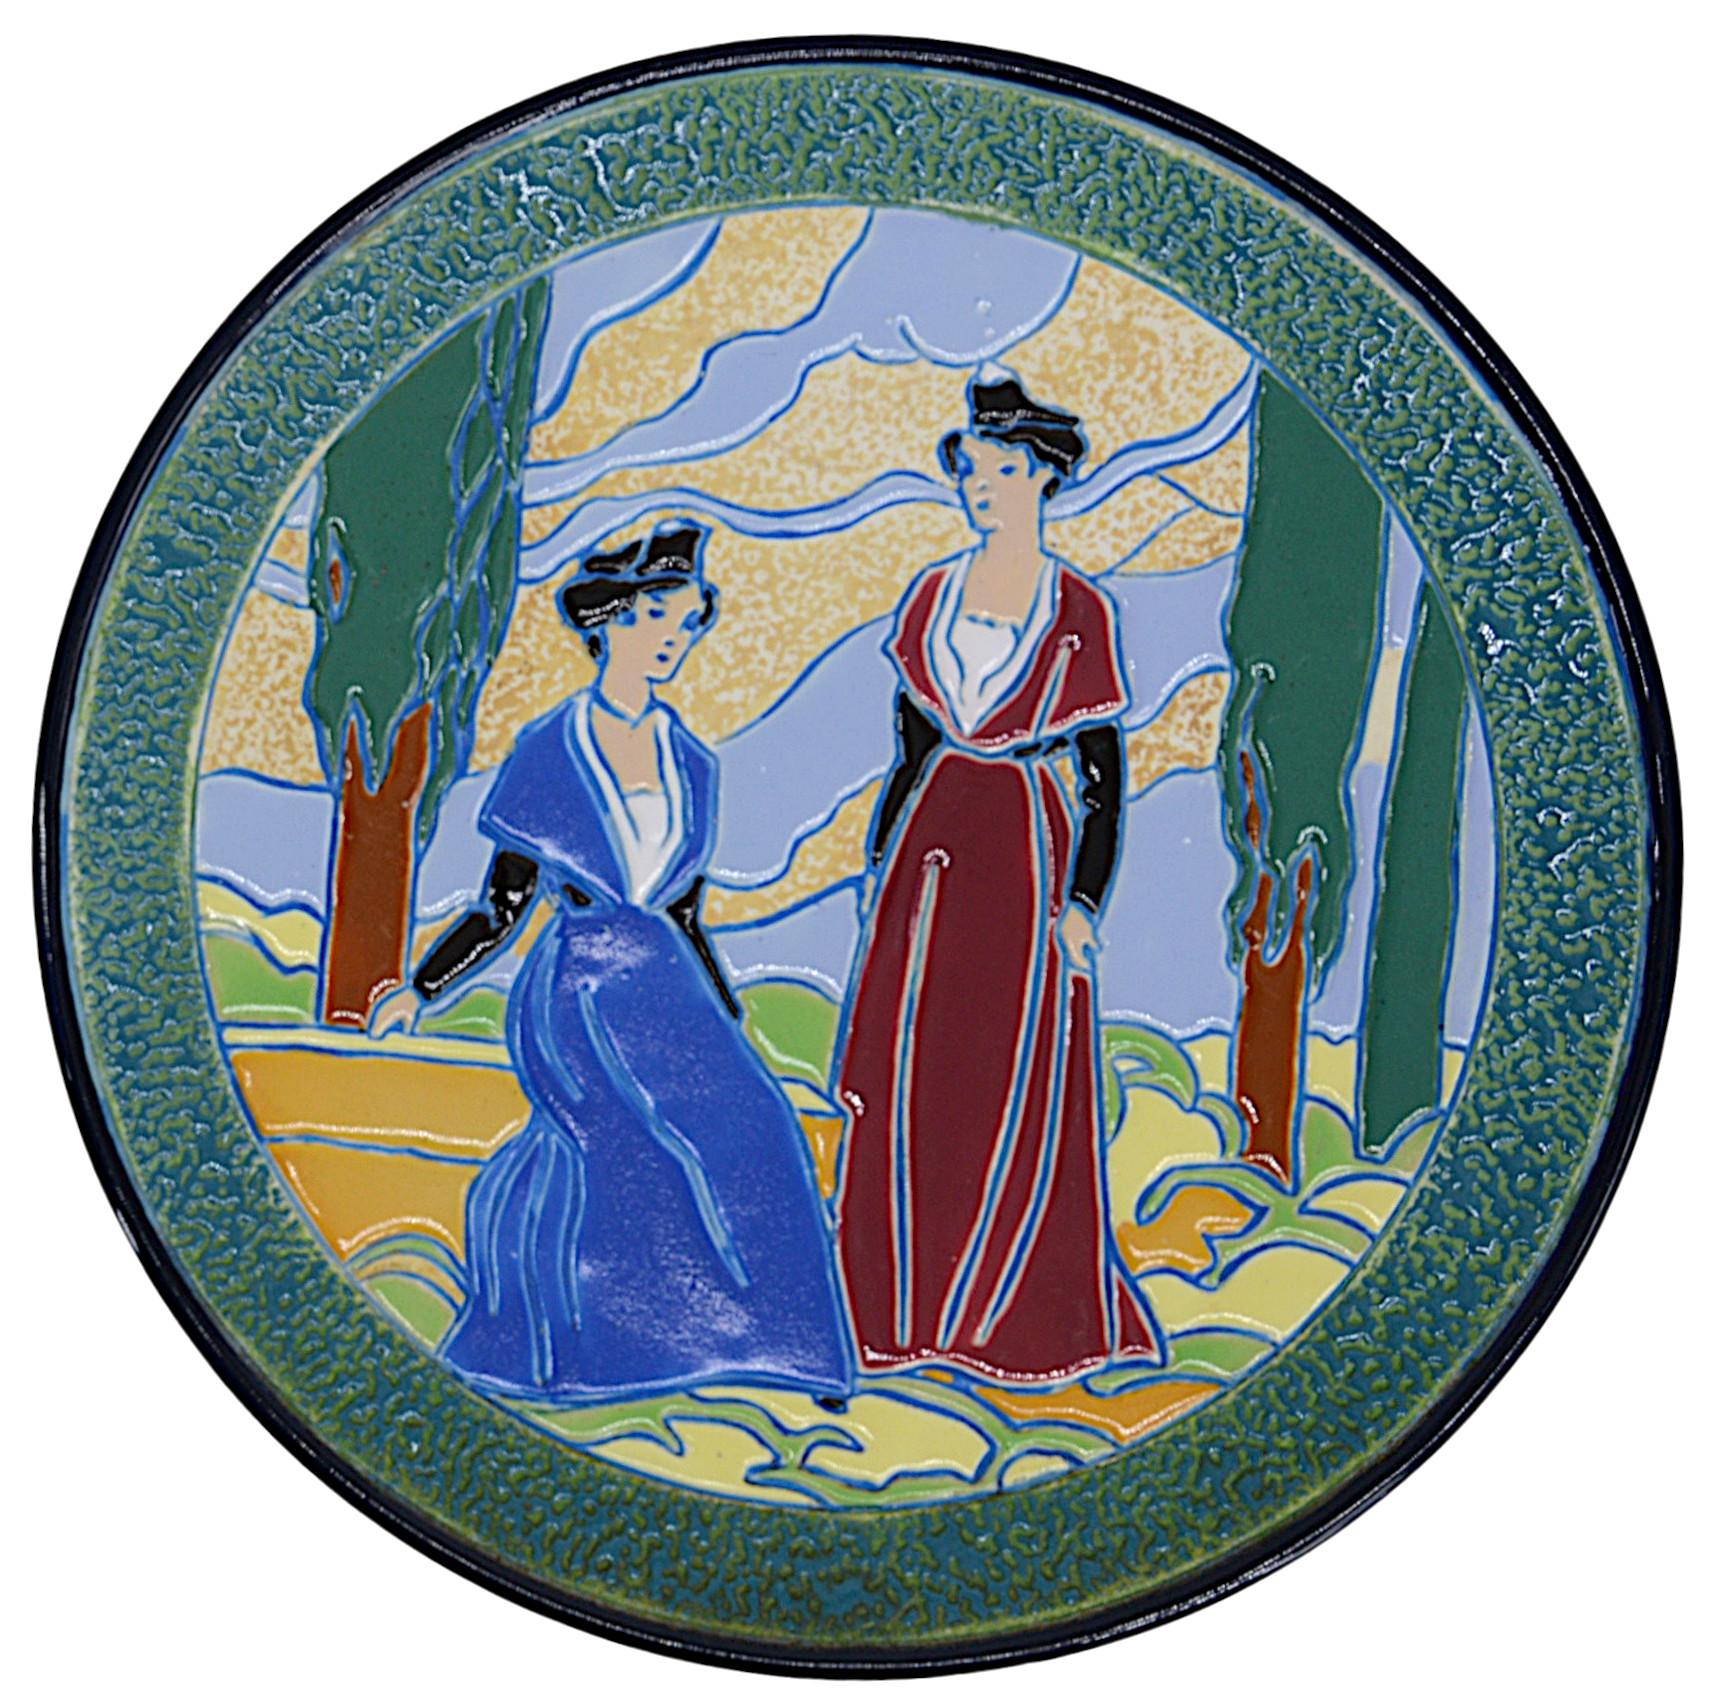 Pair of Art Deco ceramic wall plates by Amphora, circa 1930. Provencal design. Decor of young Provencal girls in a landscape typical of the Art Deco years. Young women are dressed in the fashion of Arles, Fontvielle, Saint-Remy-de-Provence, Nimes,